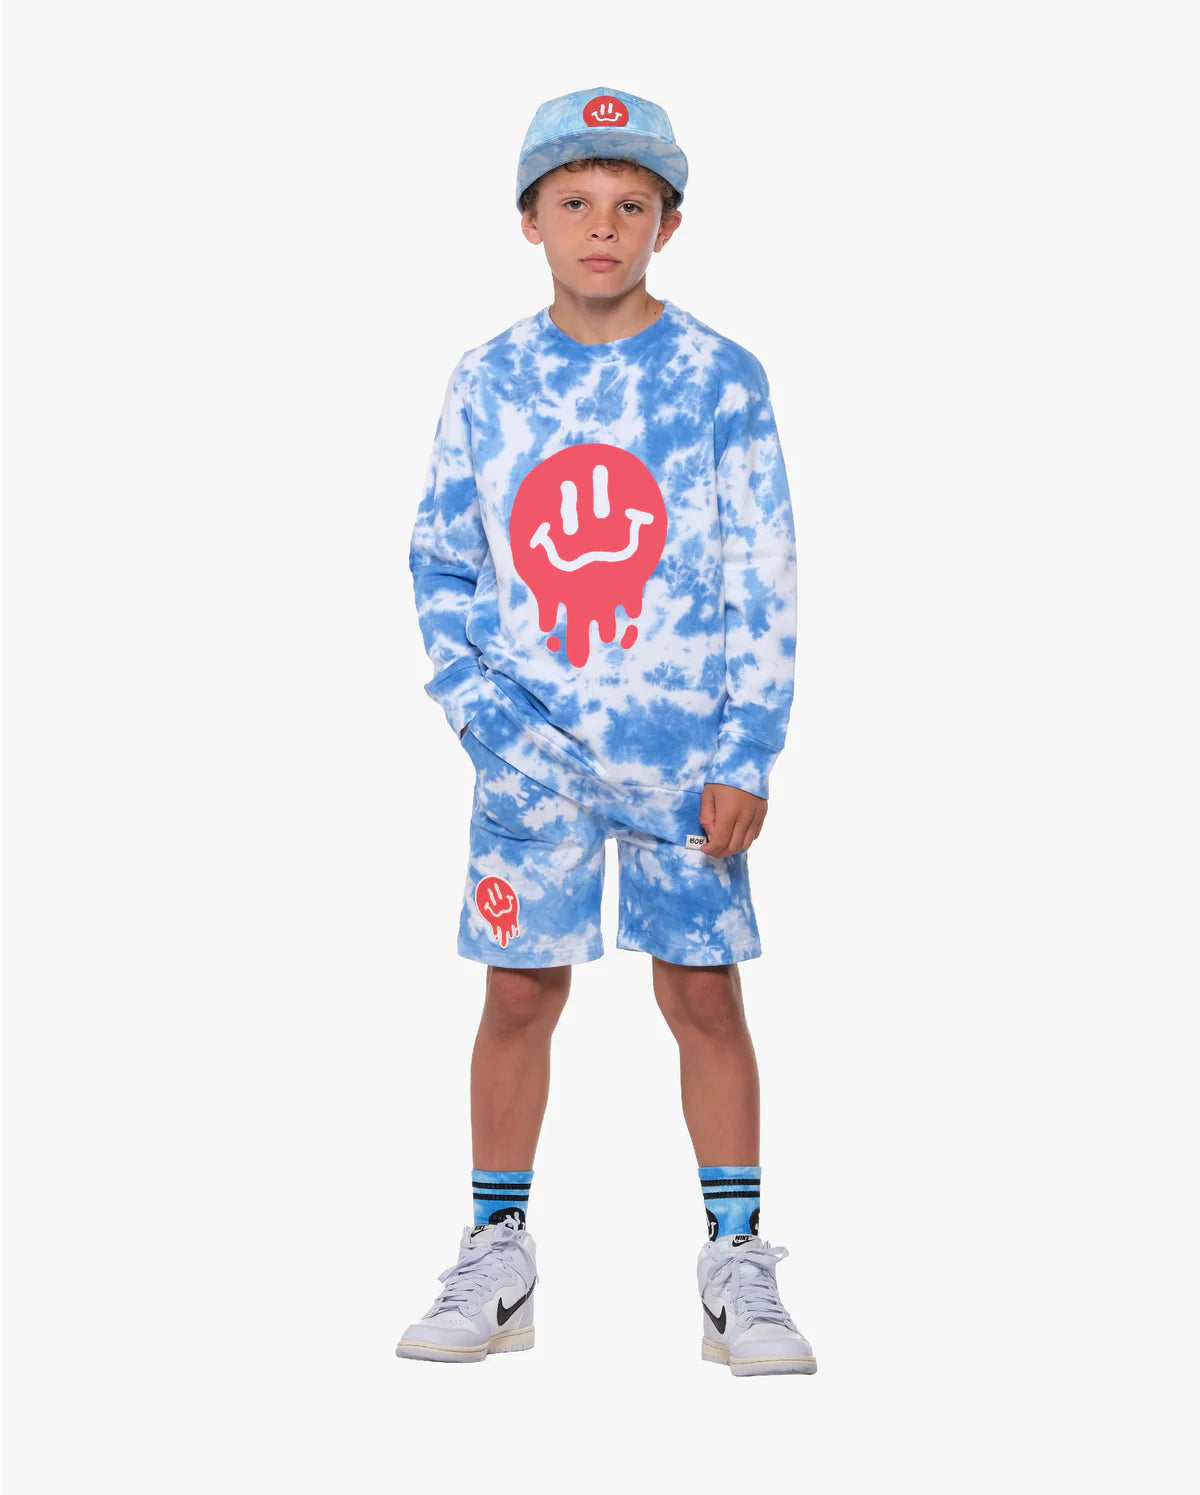 Band of Boys - Shorts Drippin In Smiles Blue Tie-Dye